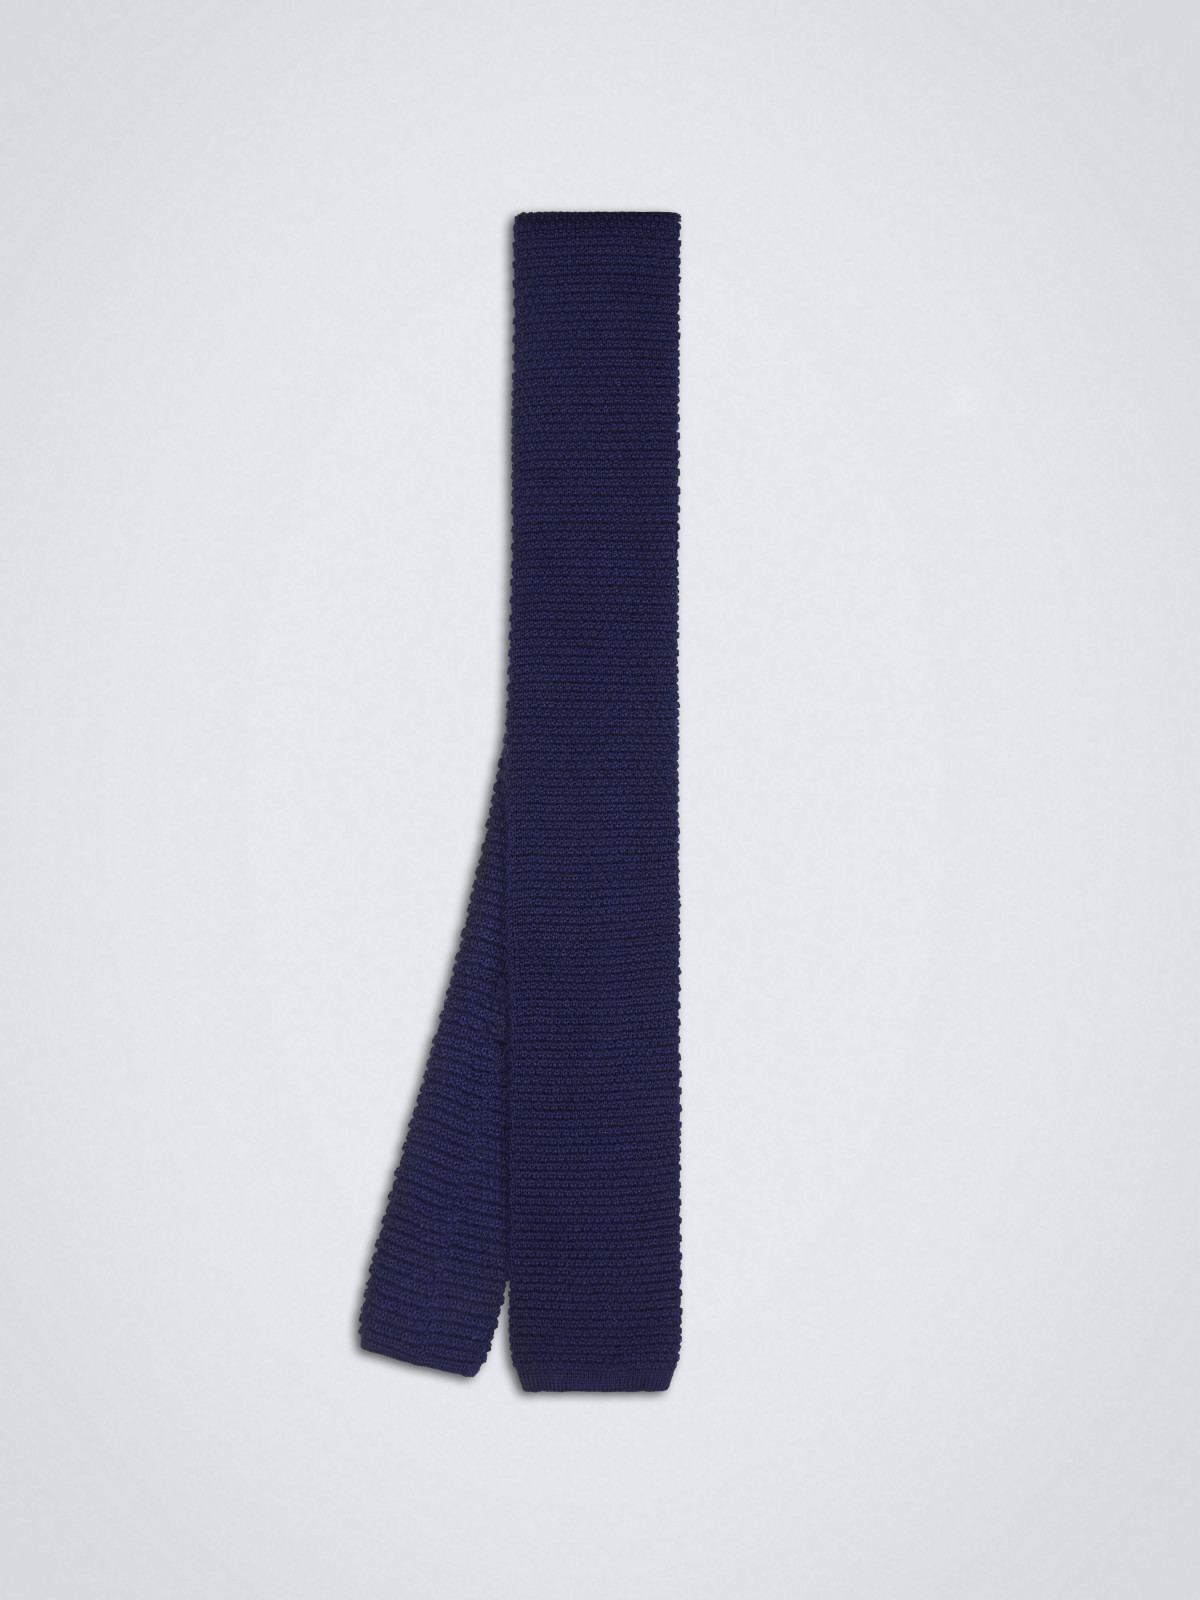 Royal blue knitted cashmere and silk tie | Brioni® US Official Store